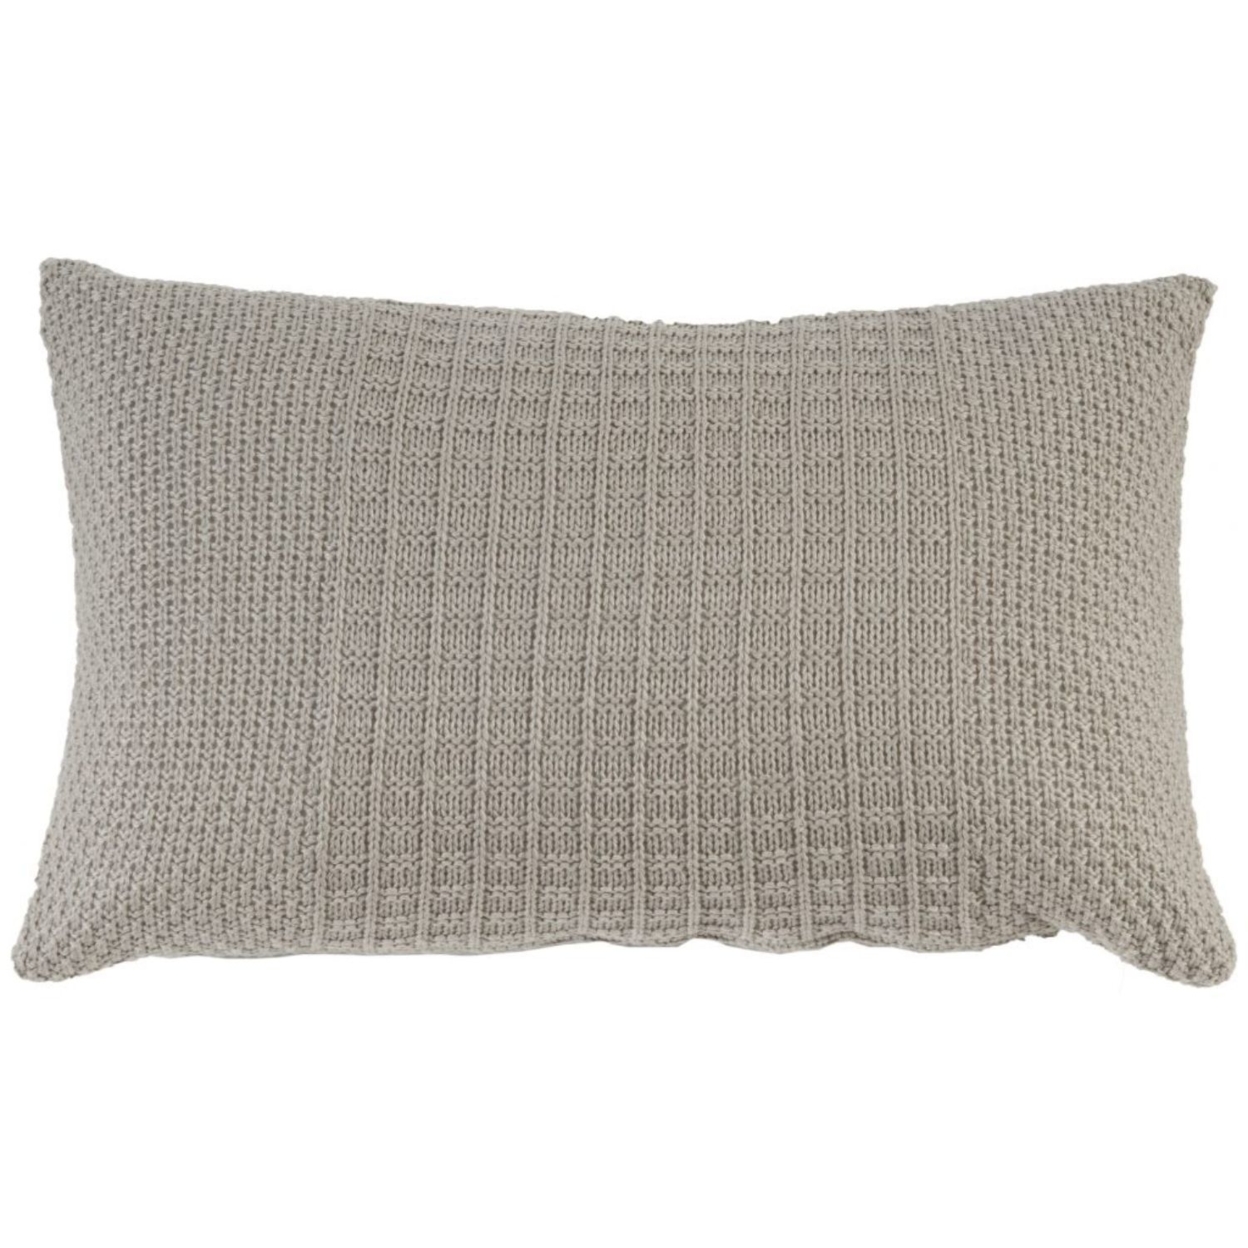 Fabric Accent Pillow With Knitted Pattern Details, Gray- Saltoro Sherpi